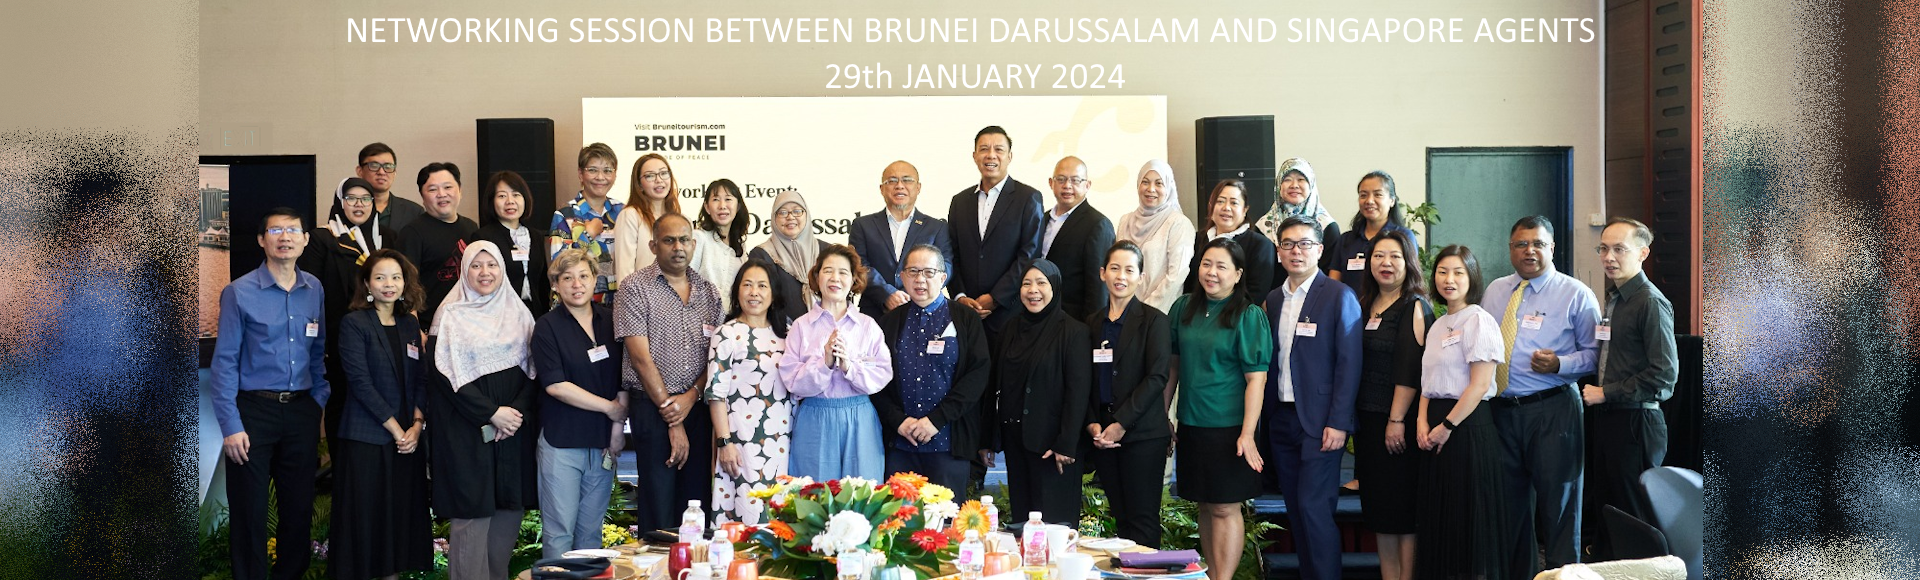 NETWORKING SESSION BRUNEI DARUSSALAM AND SINGAPORE AGENT